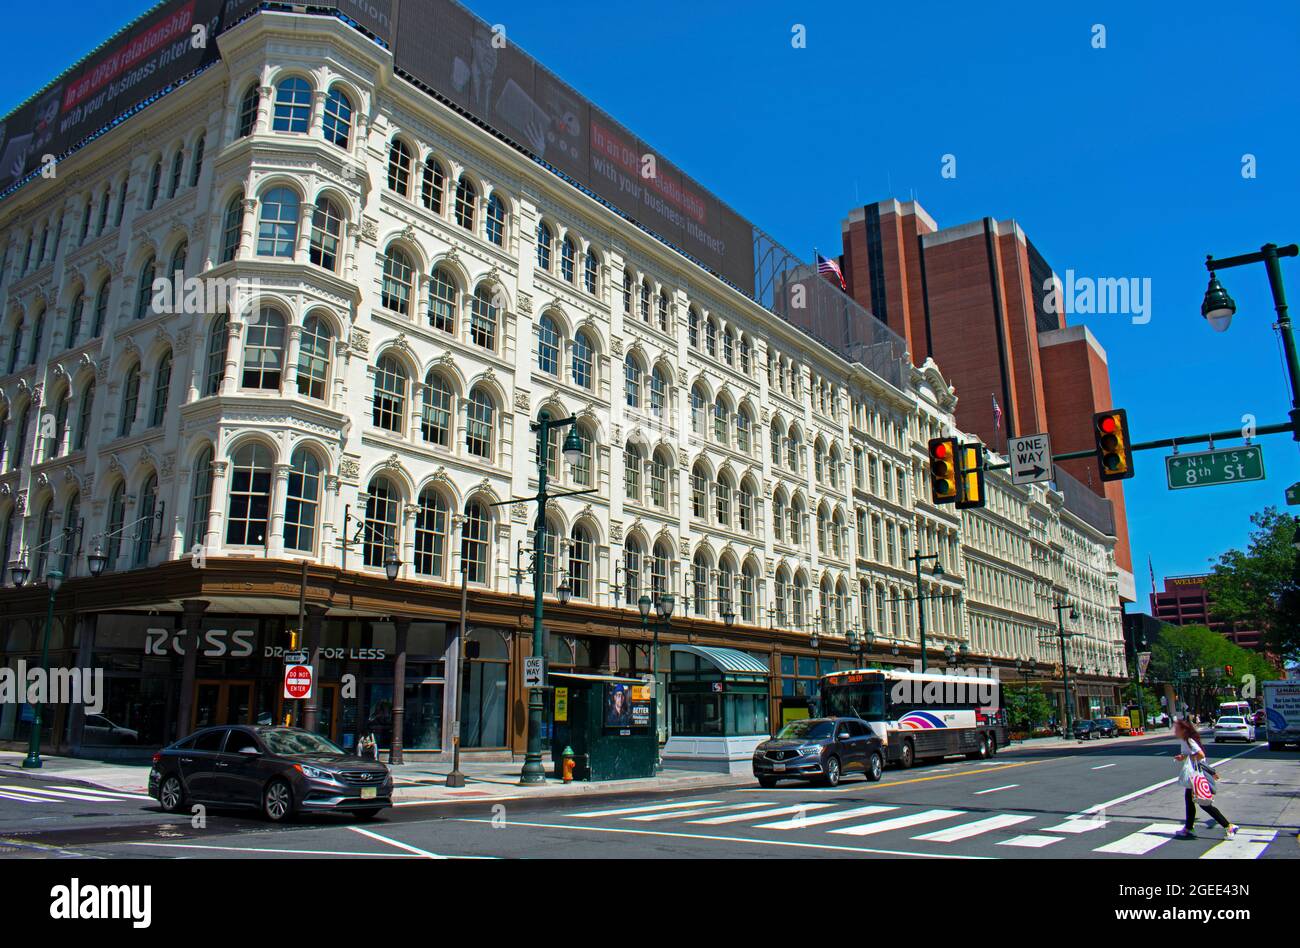 Street scene in a historic downtown Philadelphia area known as Center City, on a bright, sunny day -01 Stock Photo